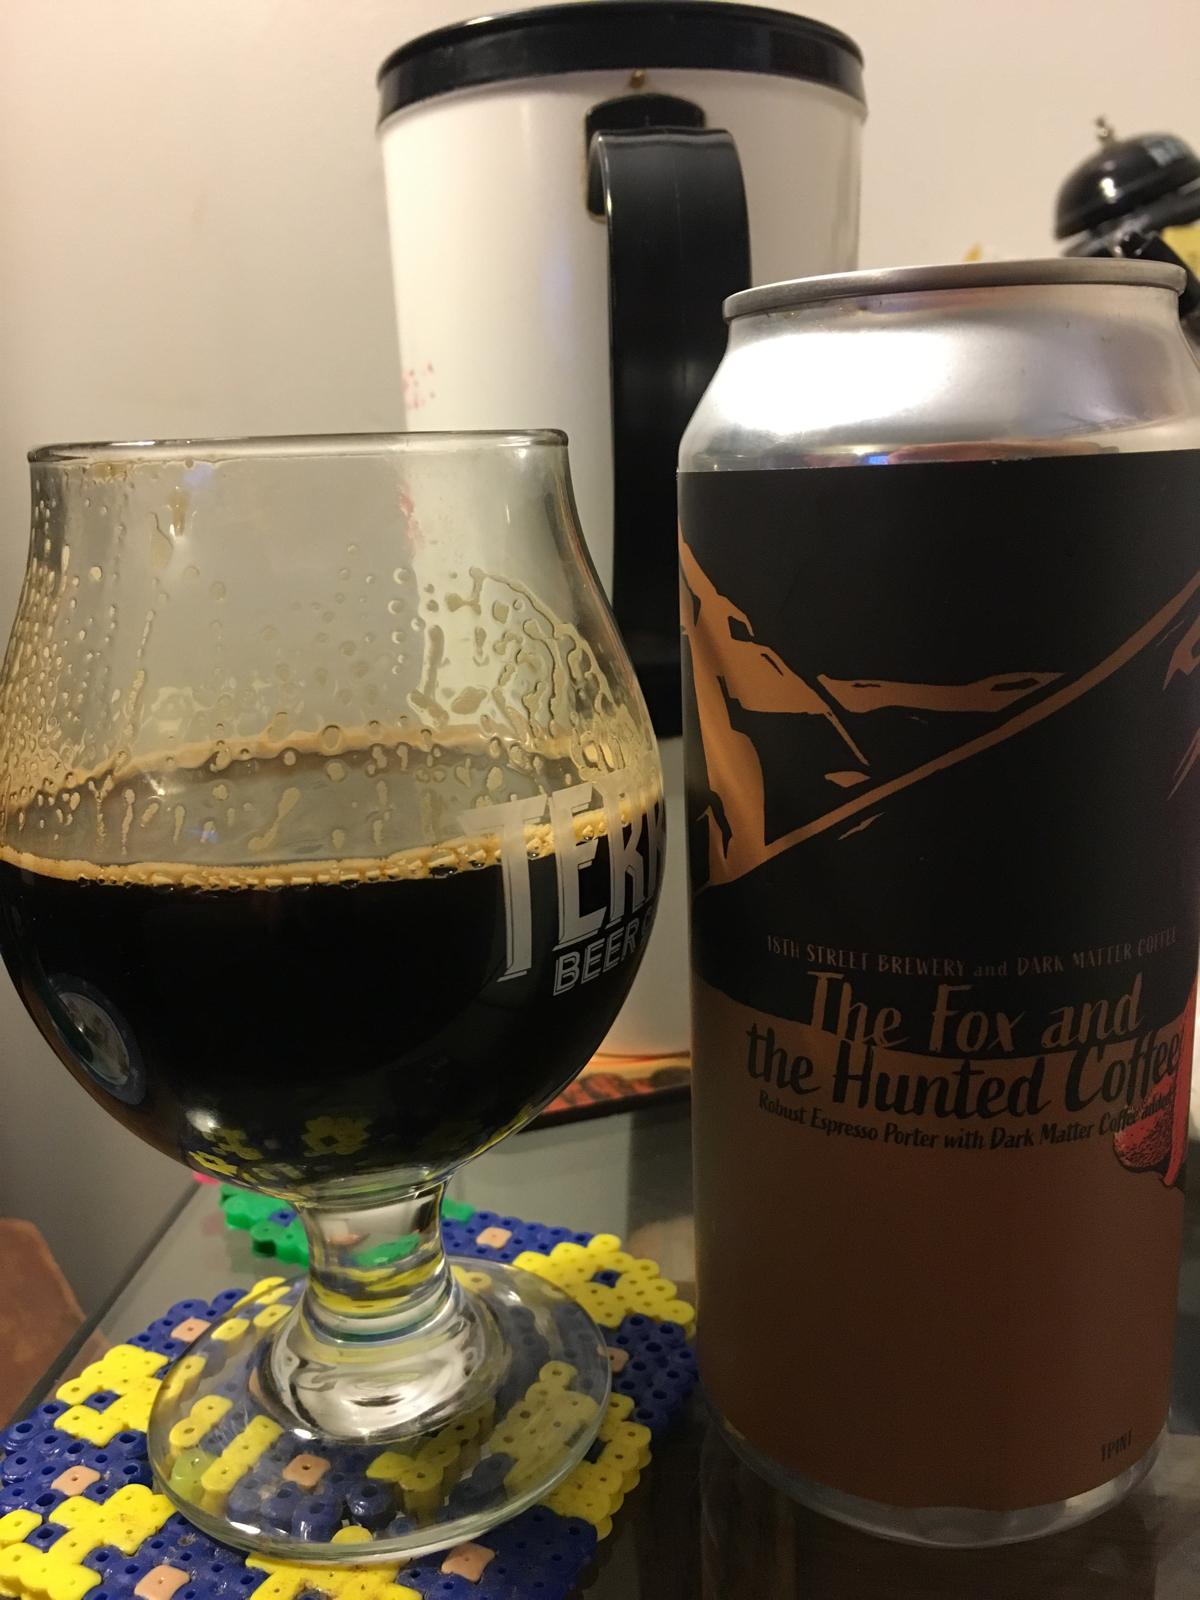 The Fox And The Hunted Coffee